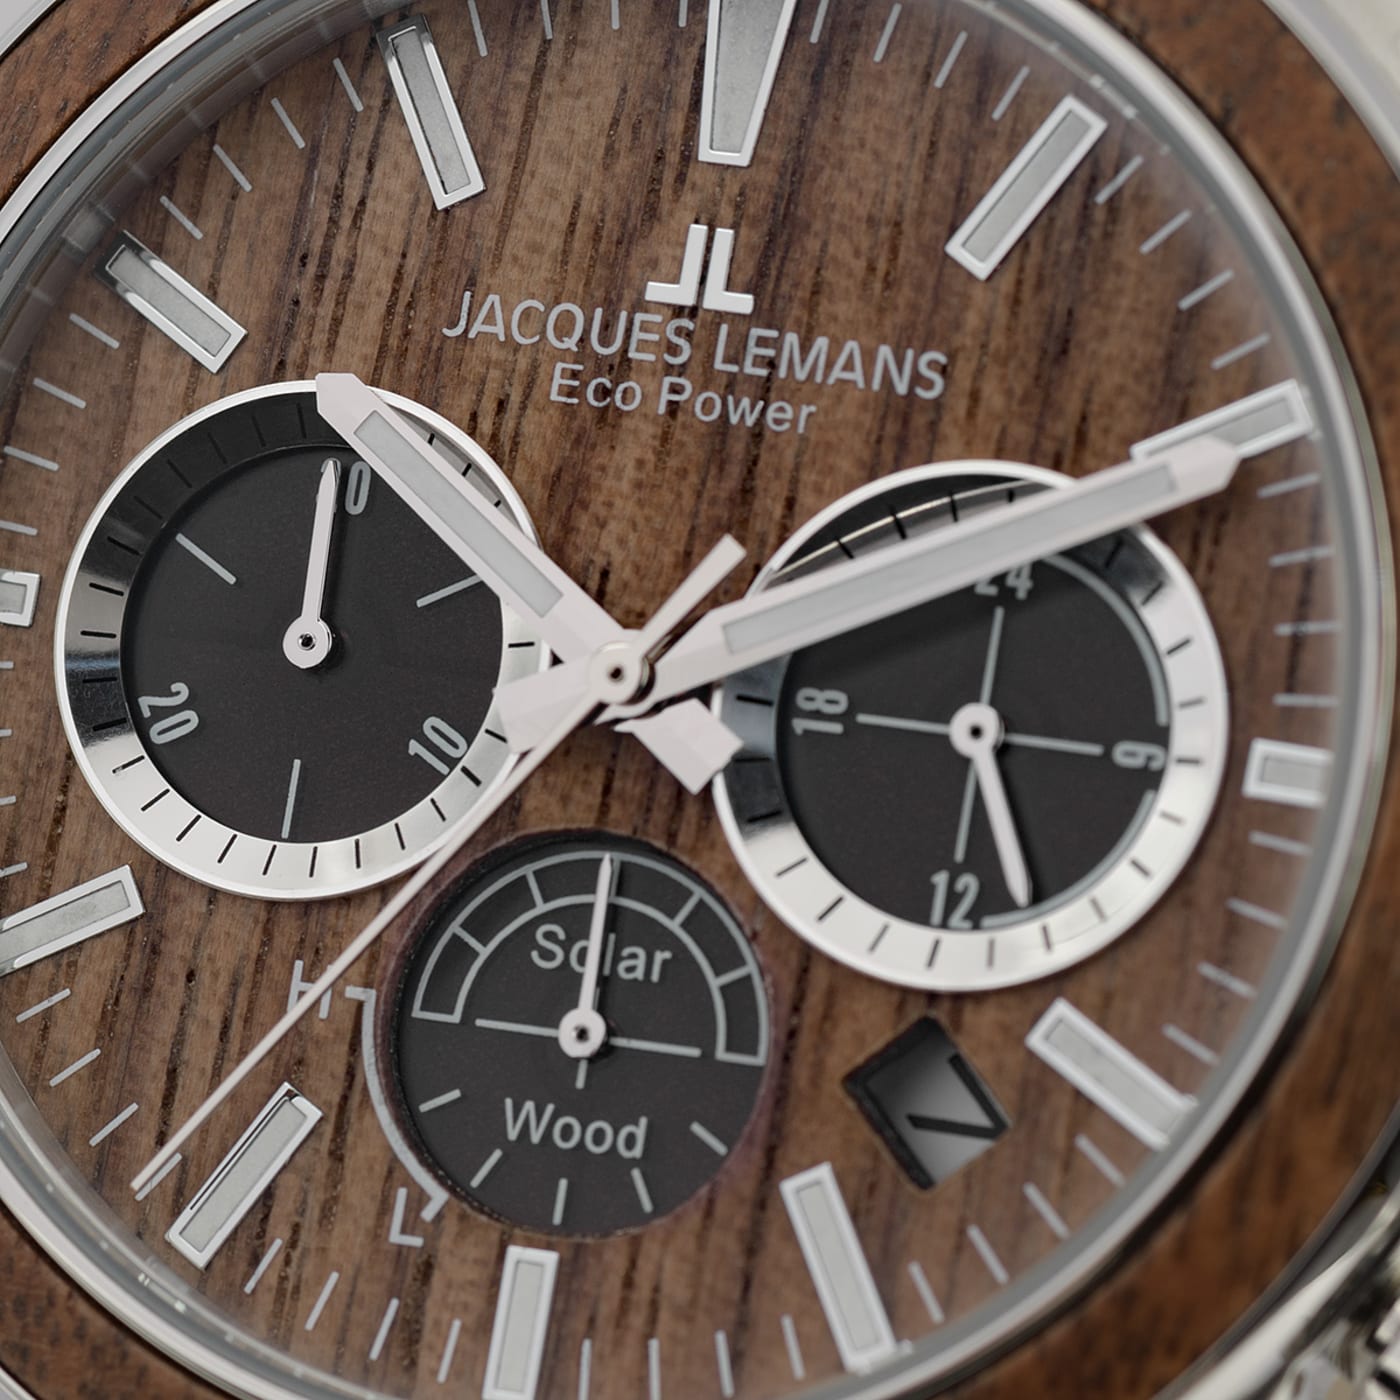 JACQUES LEMANS Eco Power Men's Watch w/Vegan Leather Band and Stainless  Strap, Chronograph 1-2115 - 155Z3A